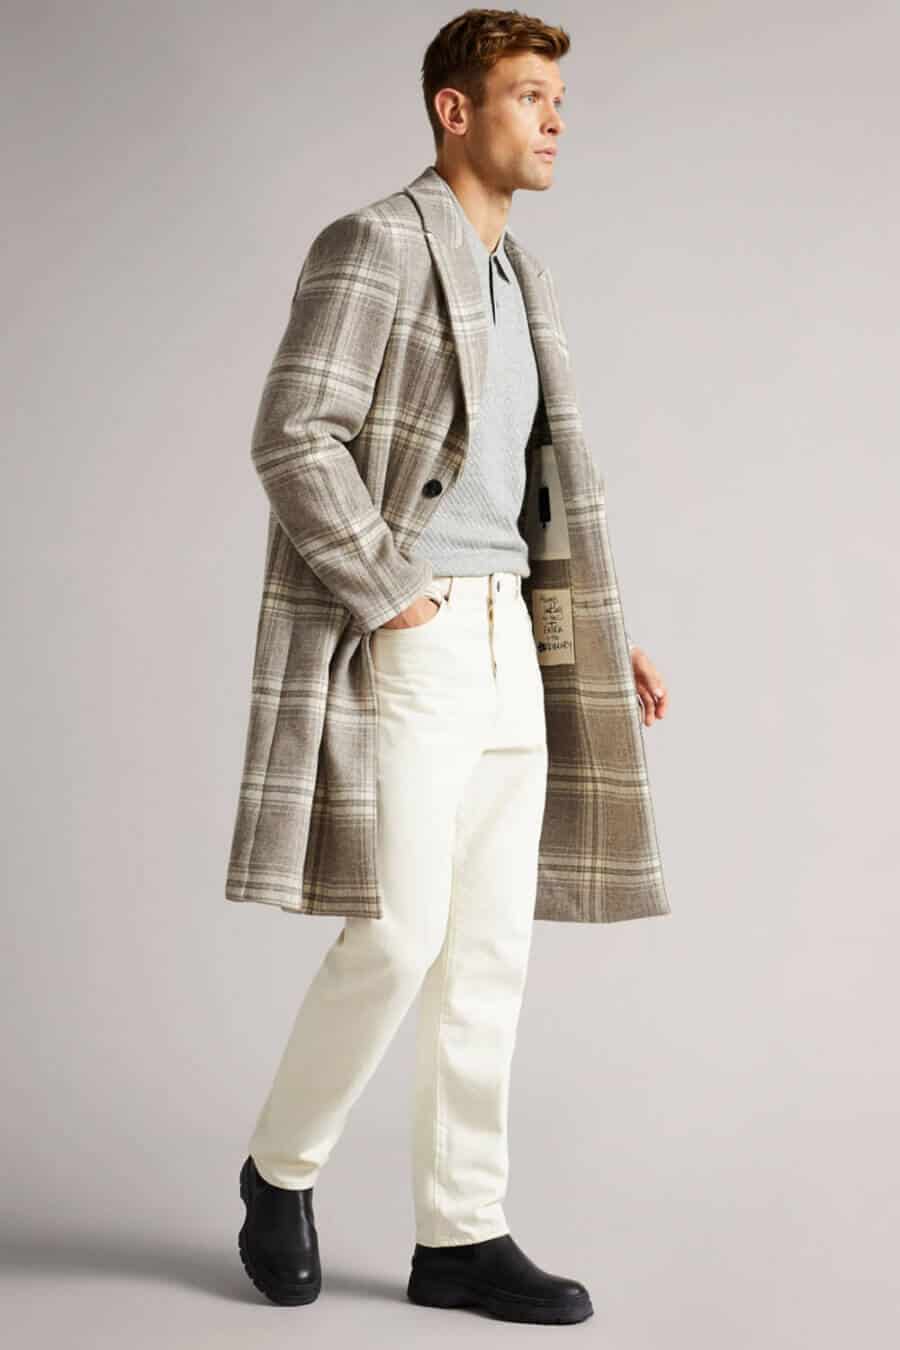 Men's white jeans and checked overcoat outfit